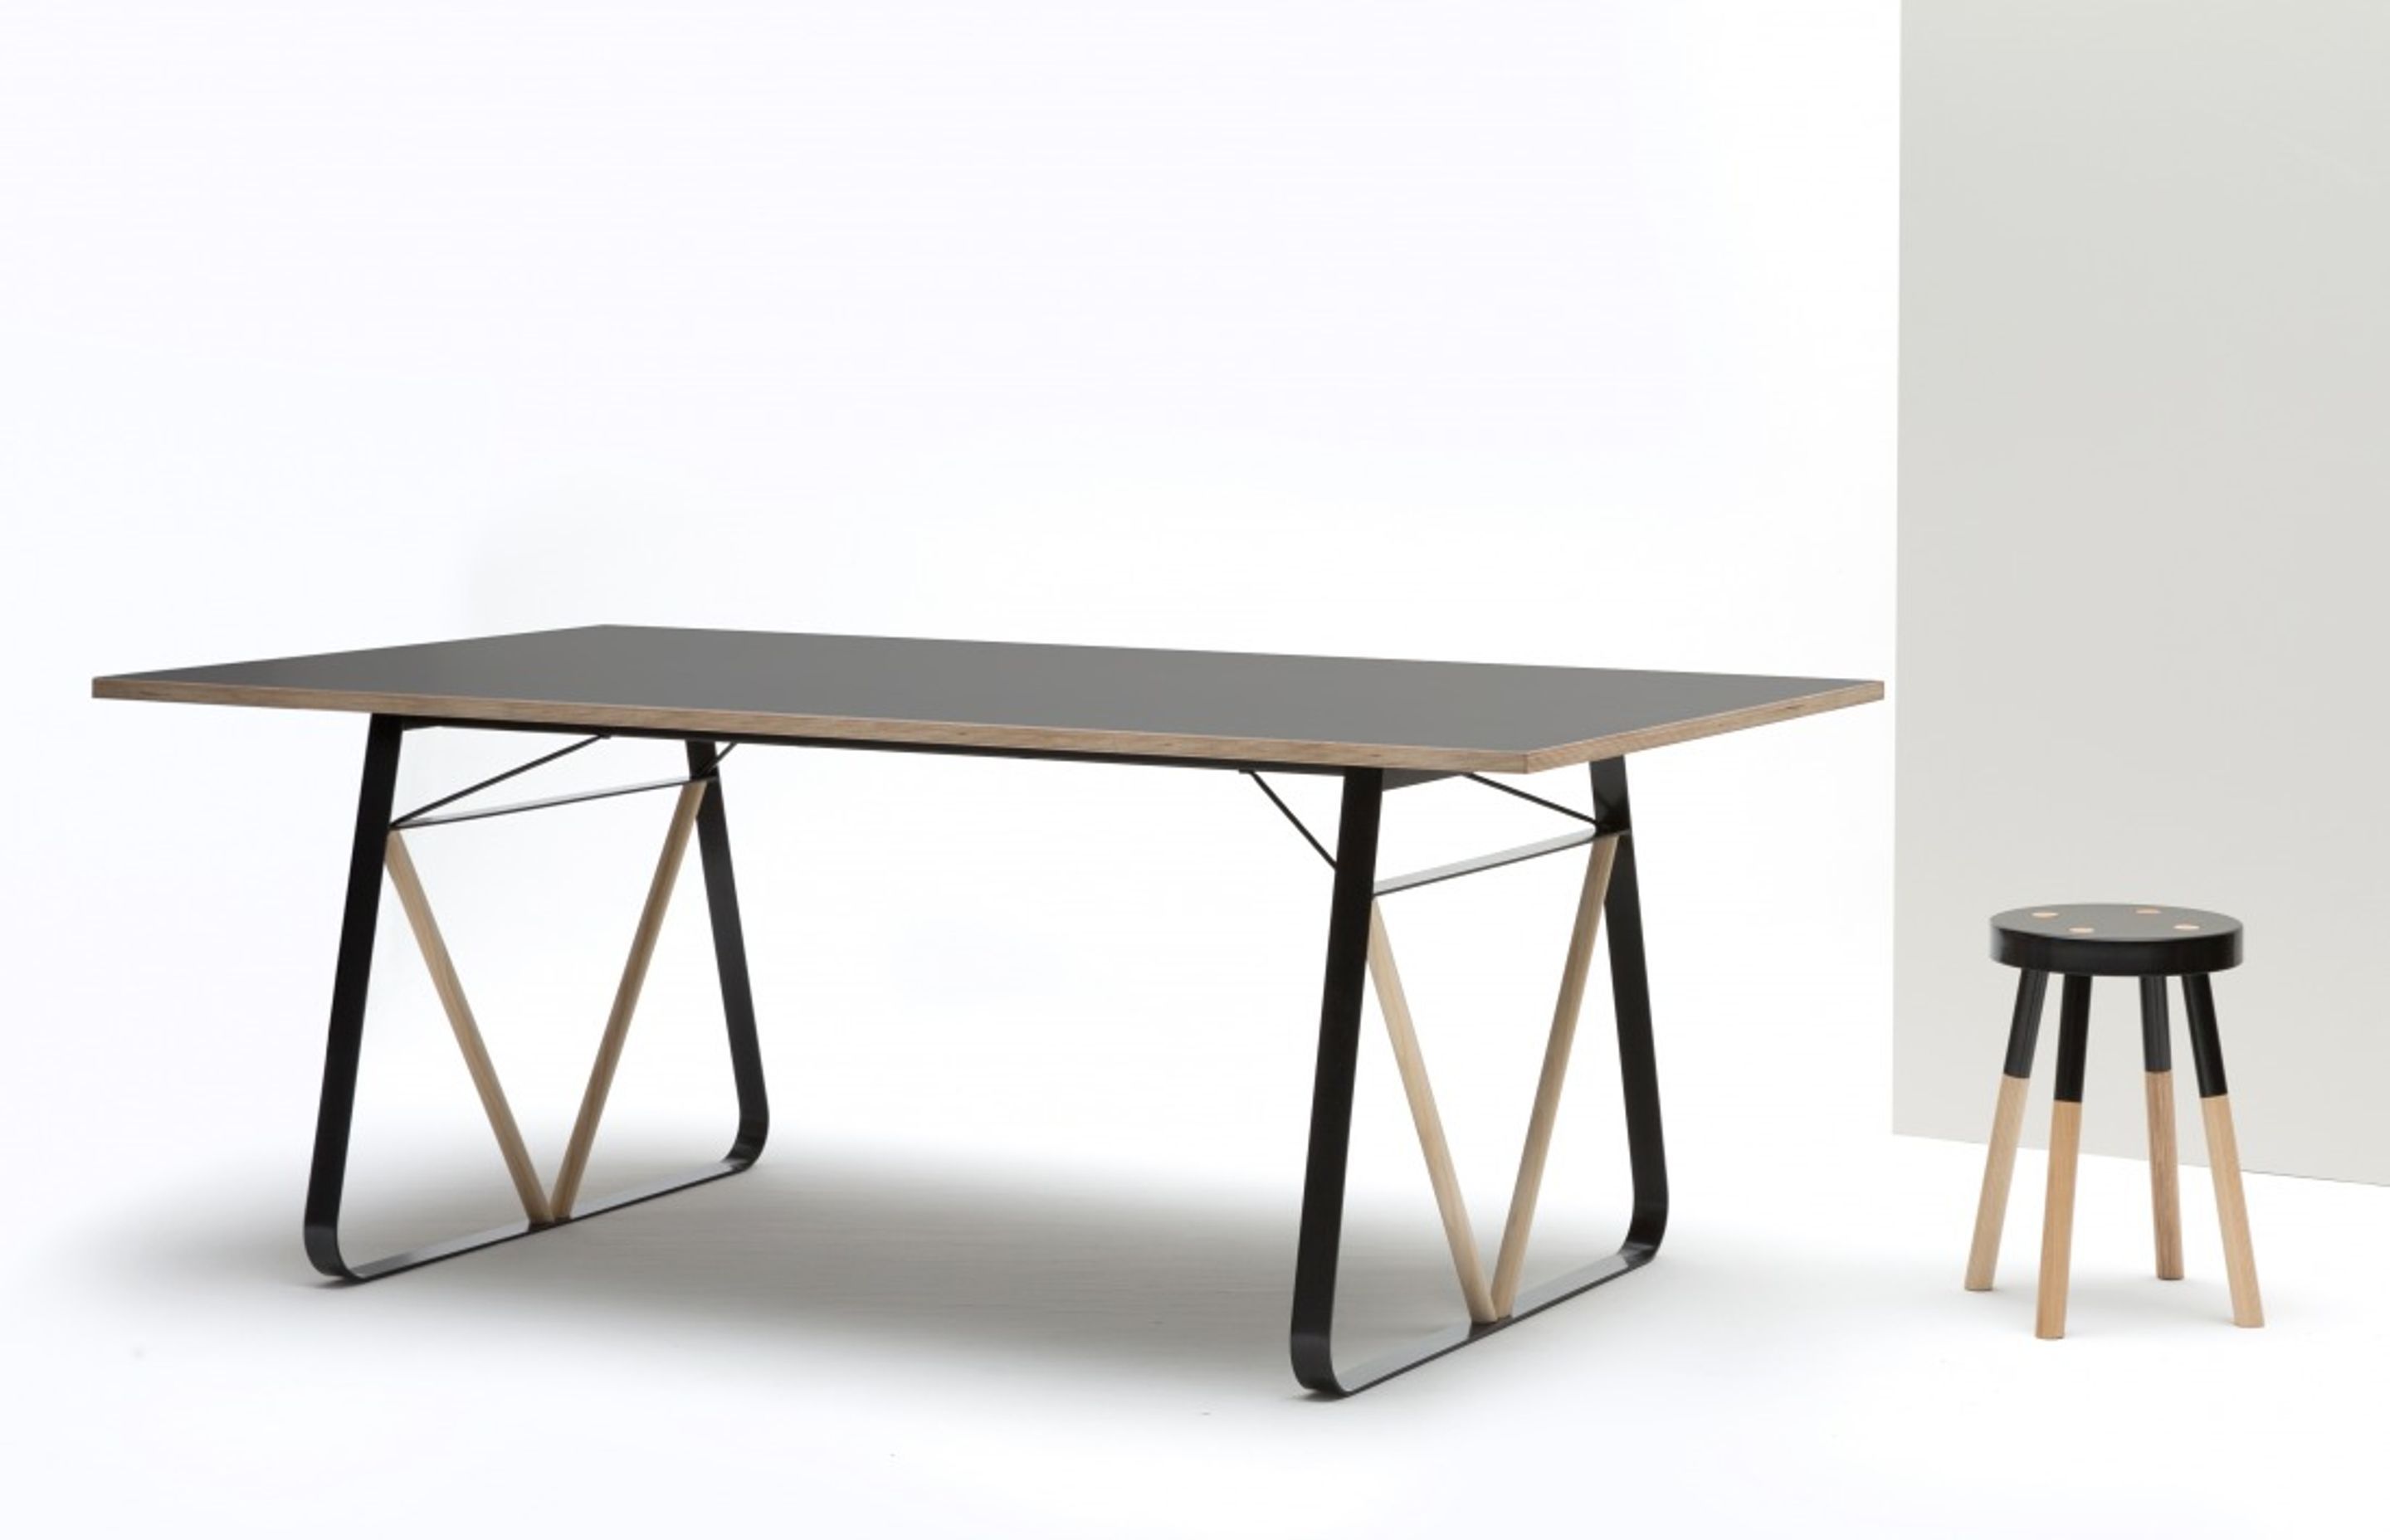 The Shift Table and 470mm Y-Stool